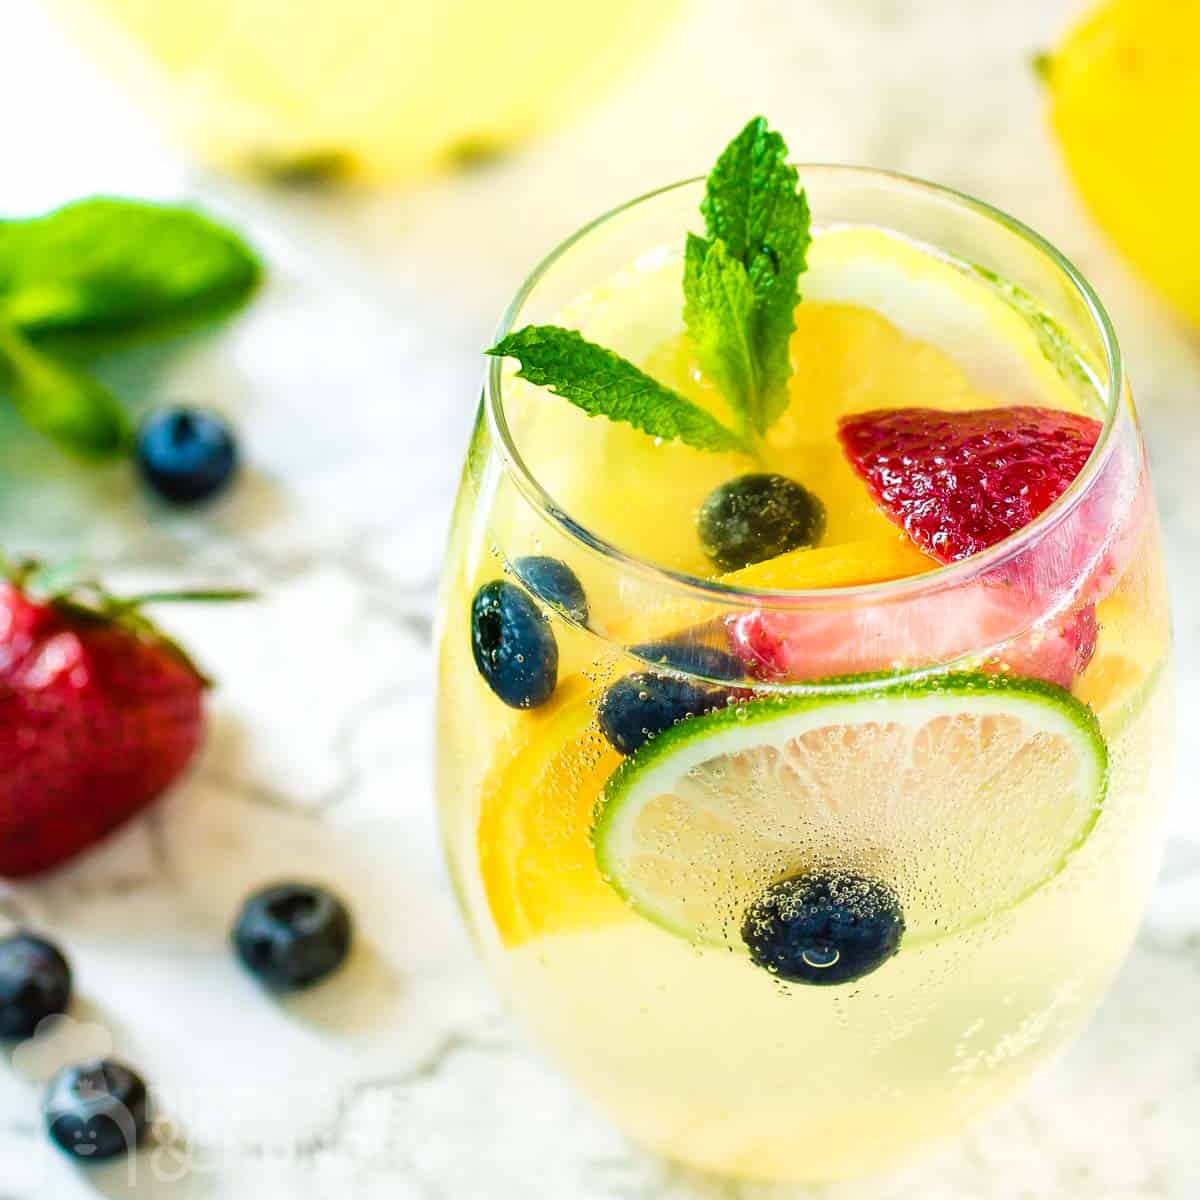 Side shot of a glass wine tumbler with sangria garnished with mint and fruits on a marble surface with a pitcher of it in the background and fruits on the side.